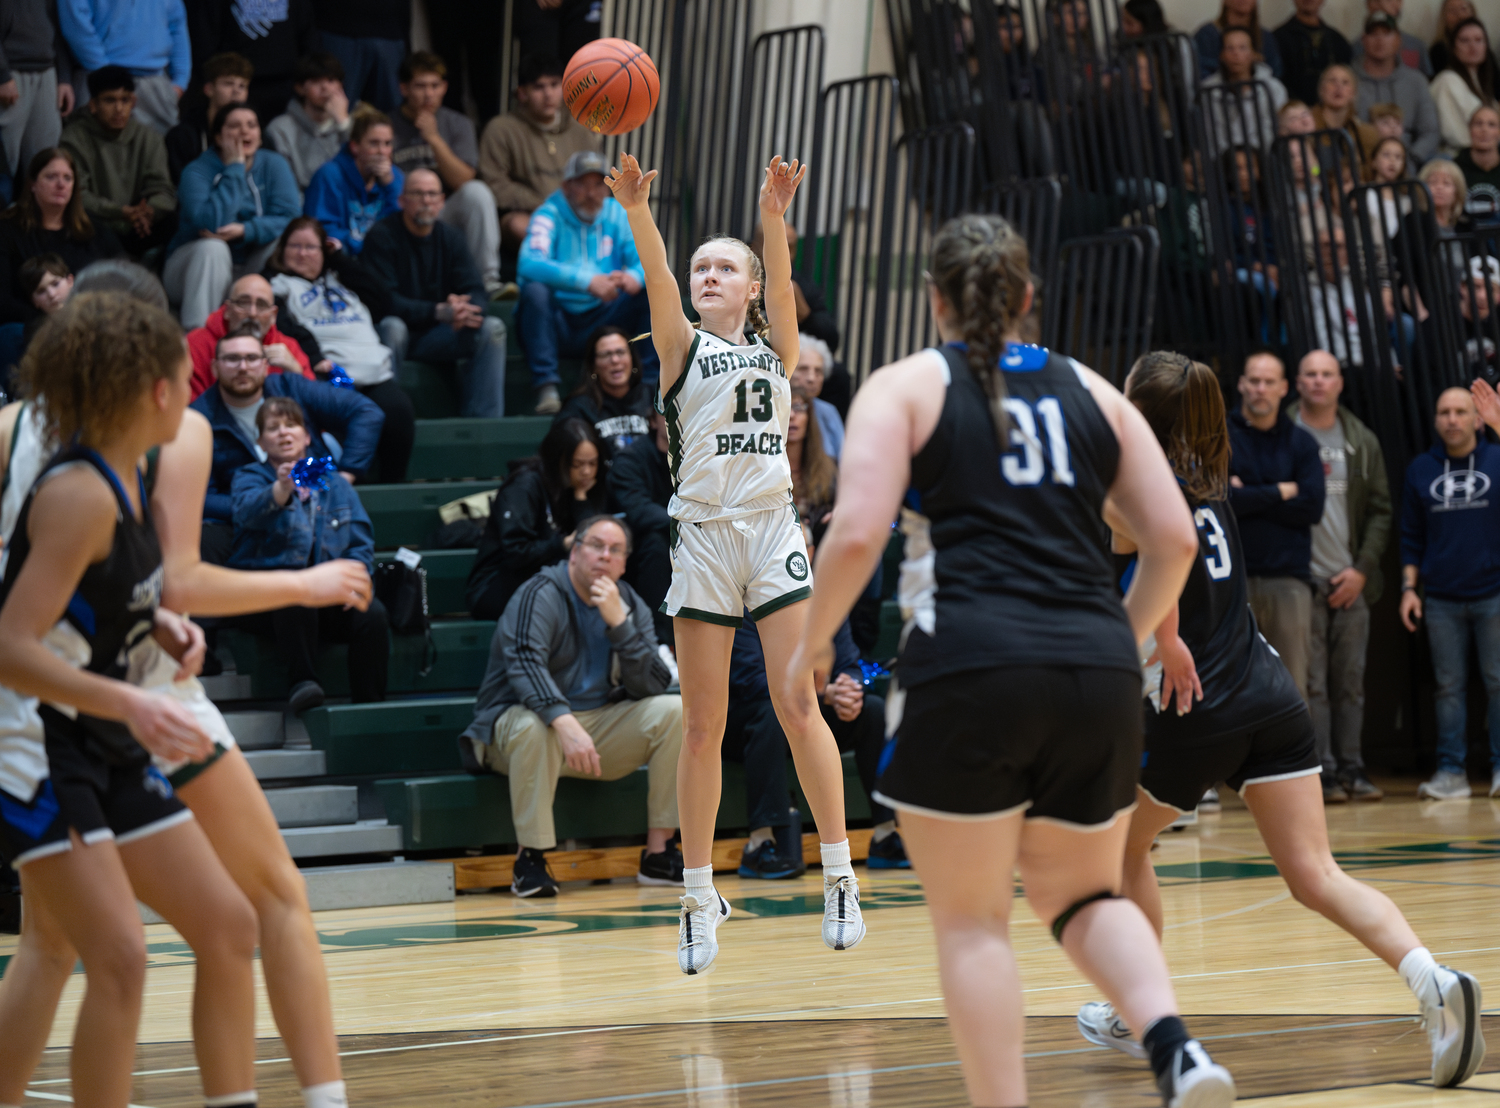 Westhampton Beach freshman Kate Sweet shoots a three. She was second on the team in scoring on Friday night with 11 points.   RON ESPOSITO